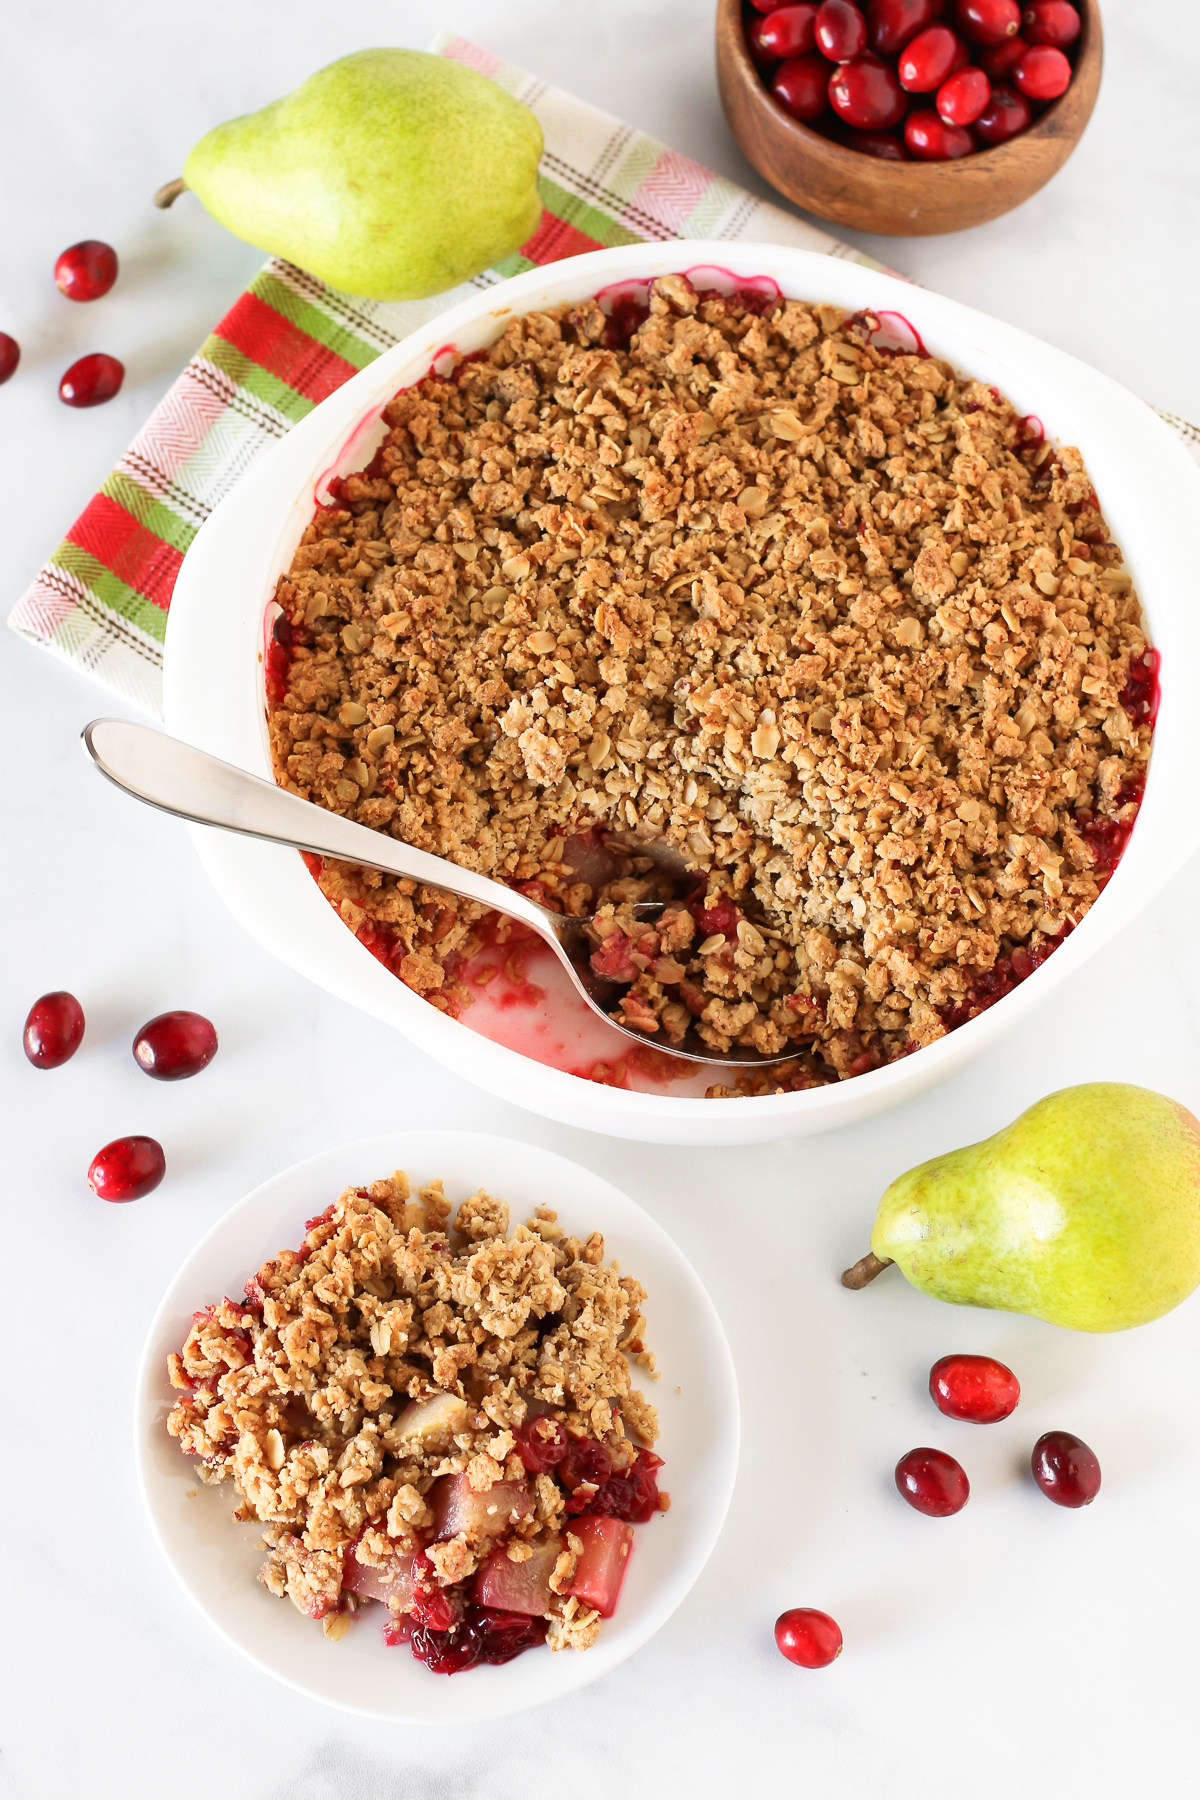 Gluten Free Vegan Cranberry Pear Crisp. Tender pears, tart cranberries and a golden oat-pecan crumb topping. A rustic, easy holiday dessert!